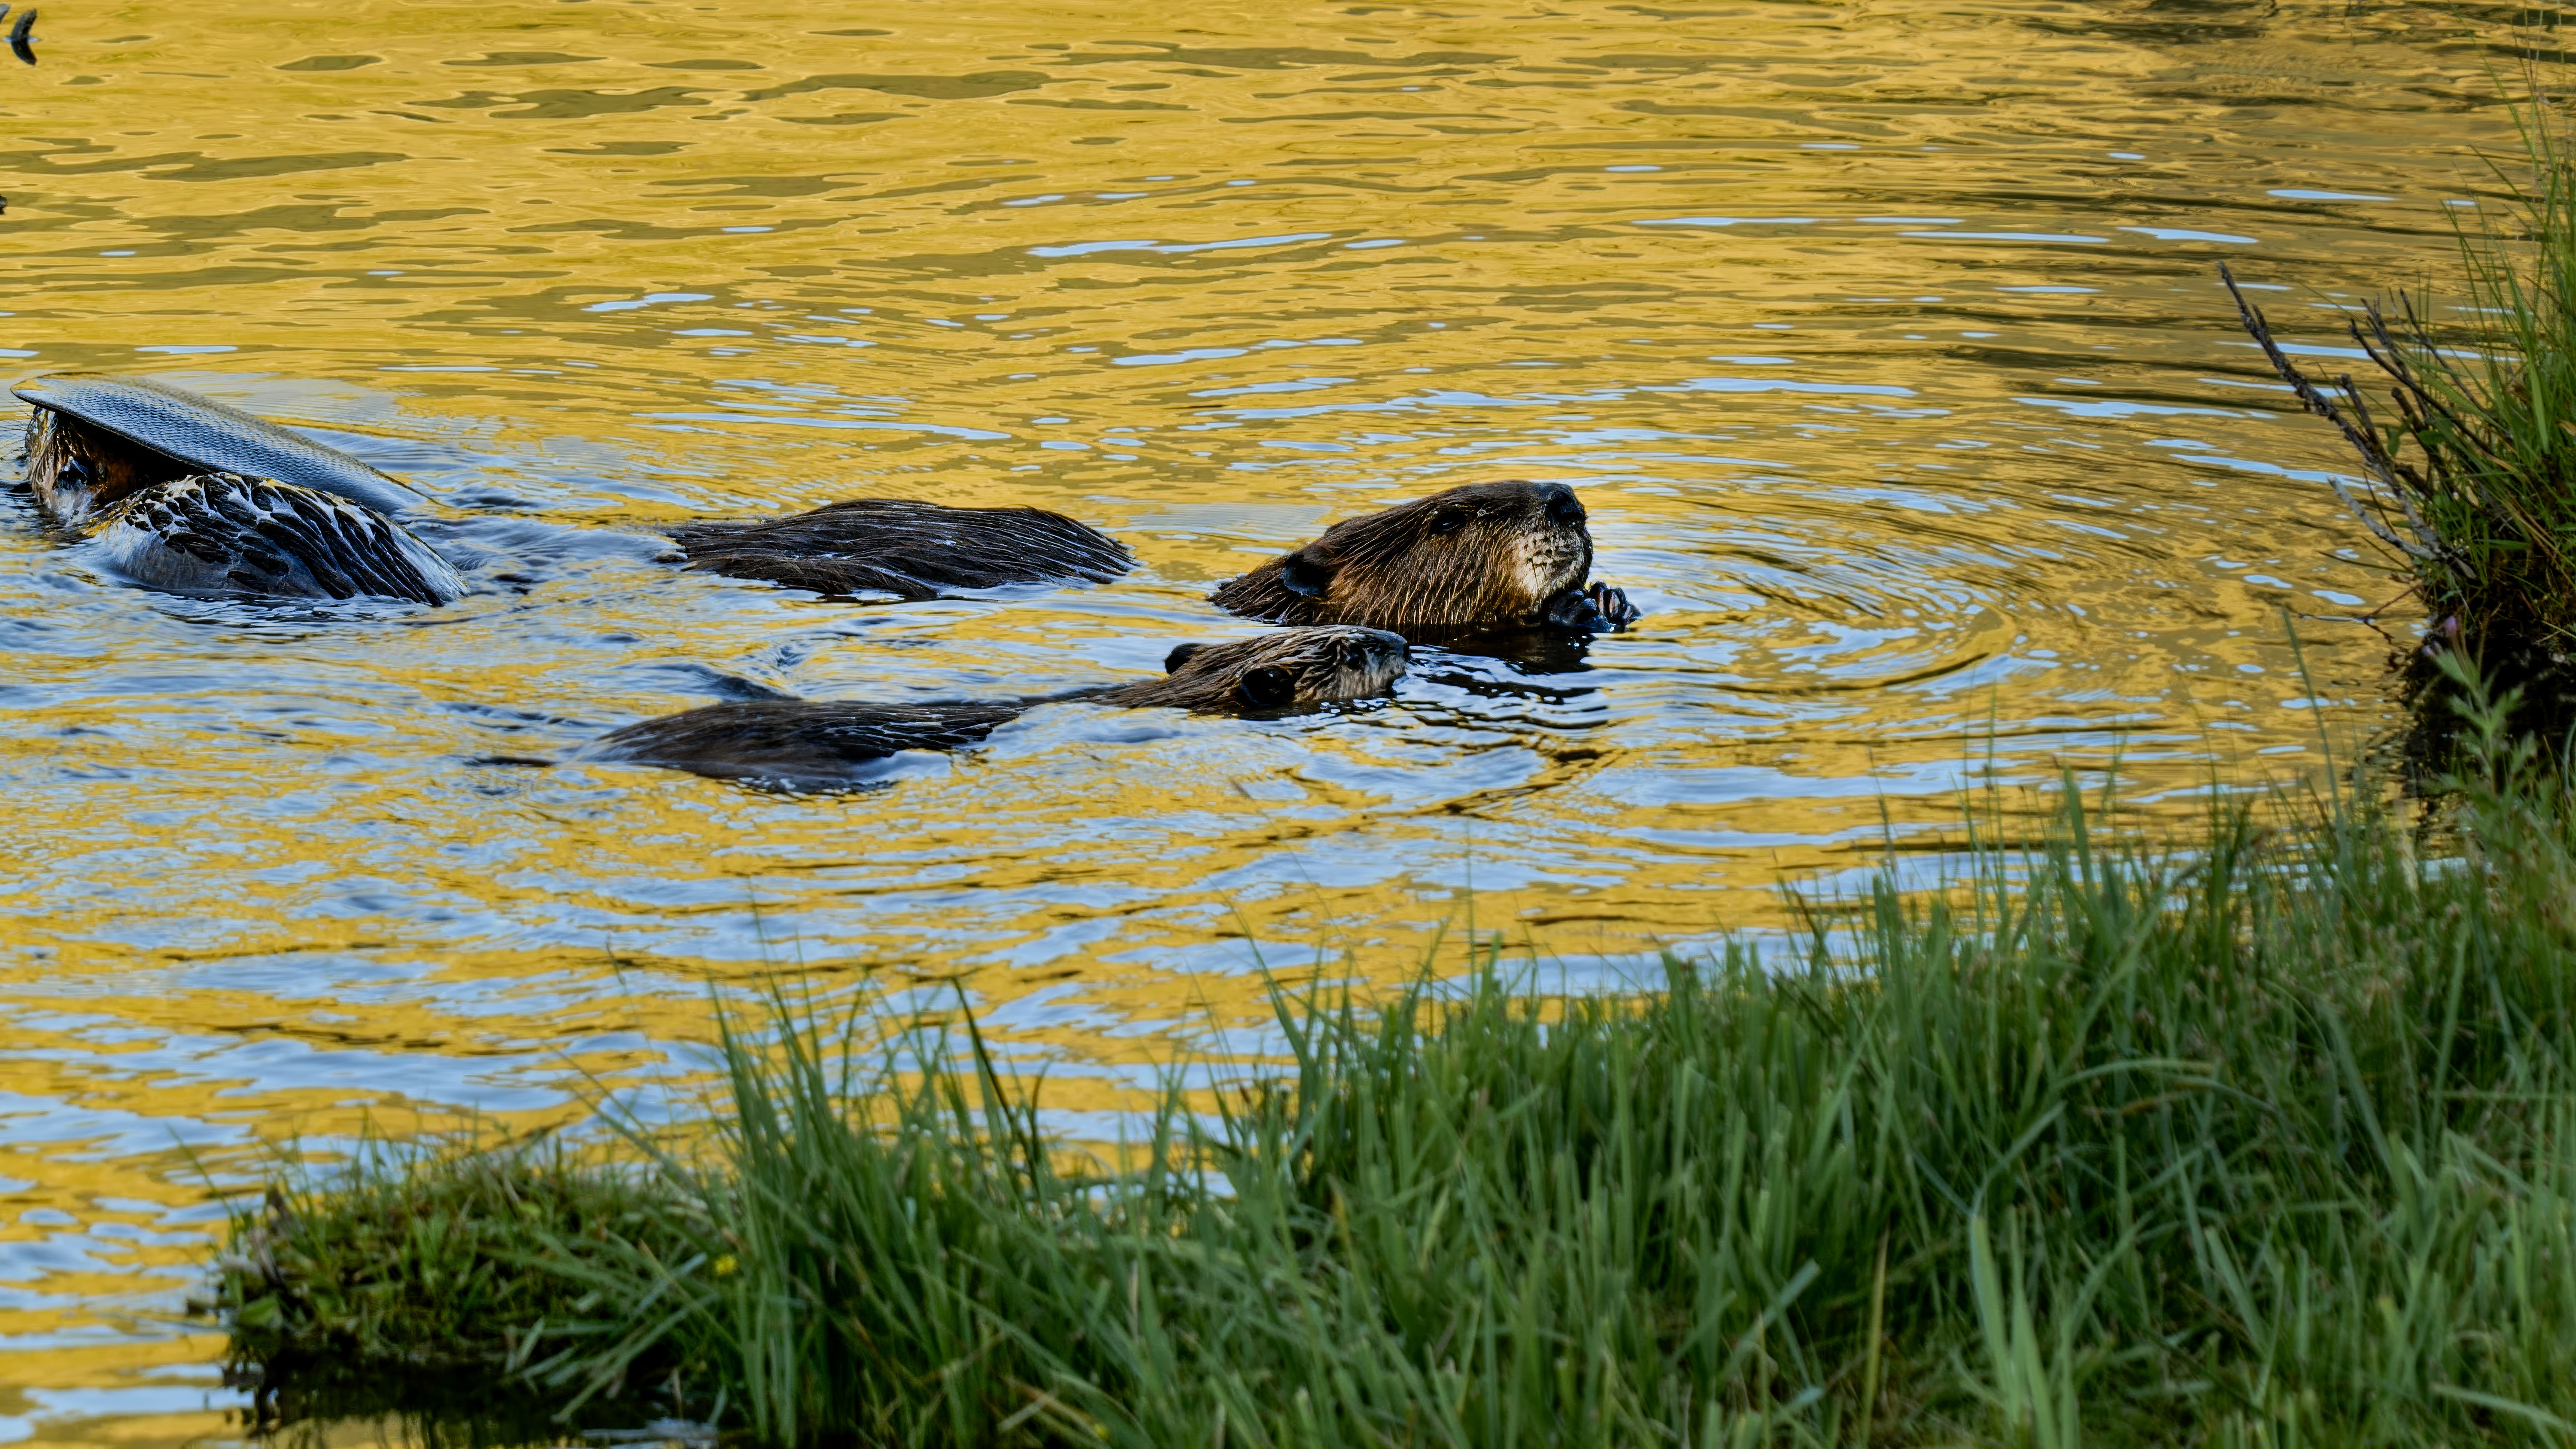 Beavers are helping fight climate change, satellite data shows